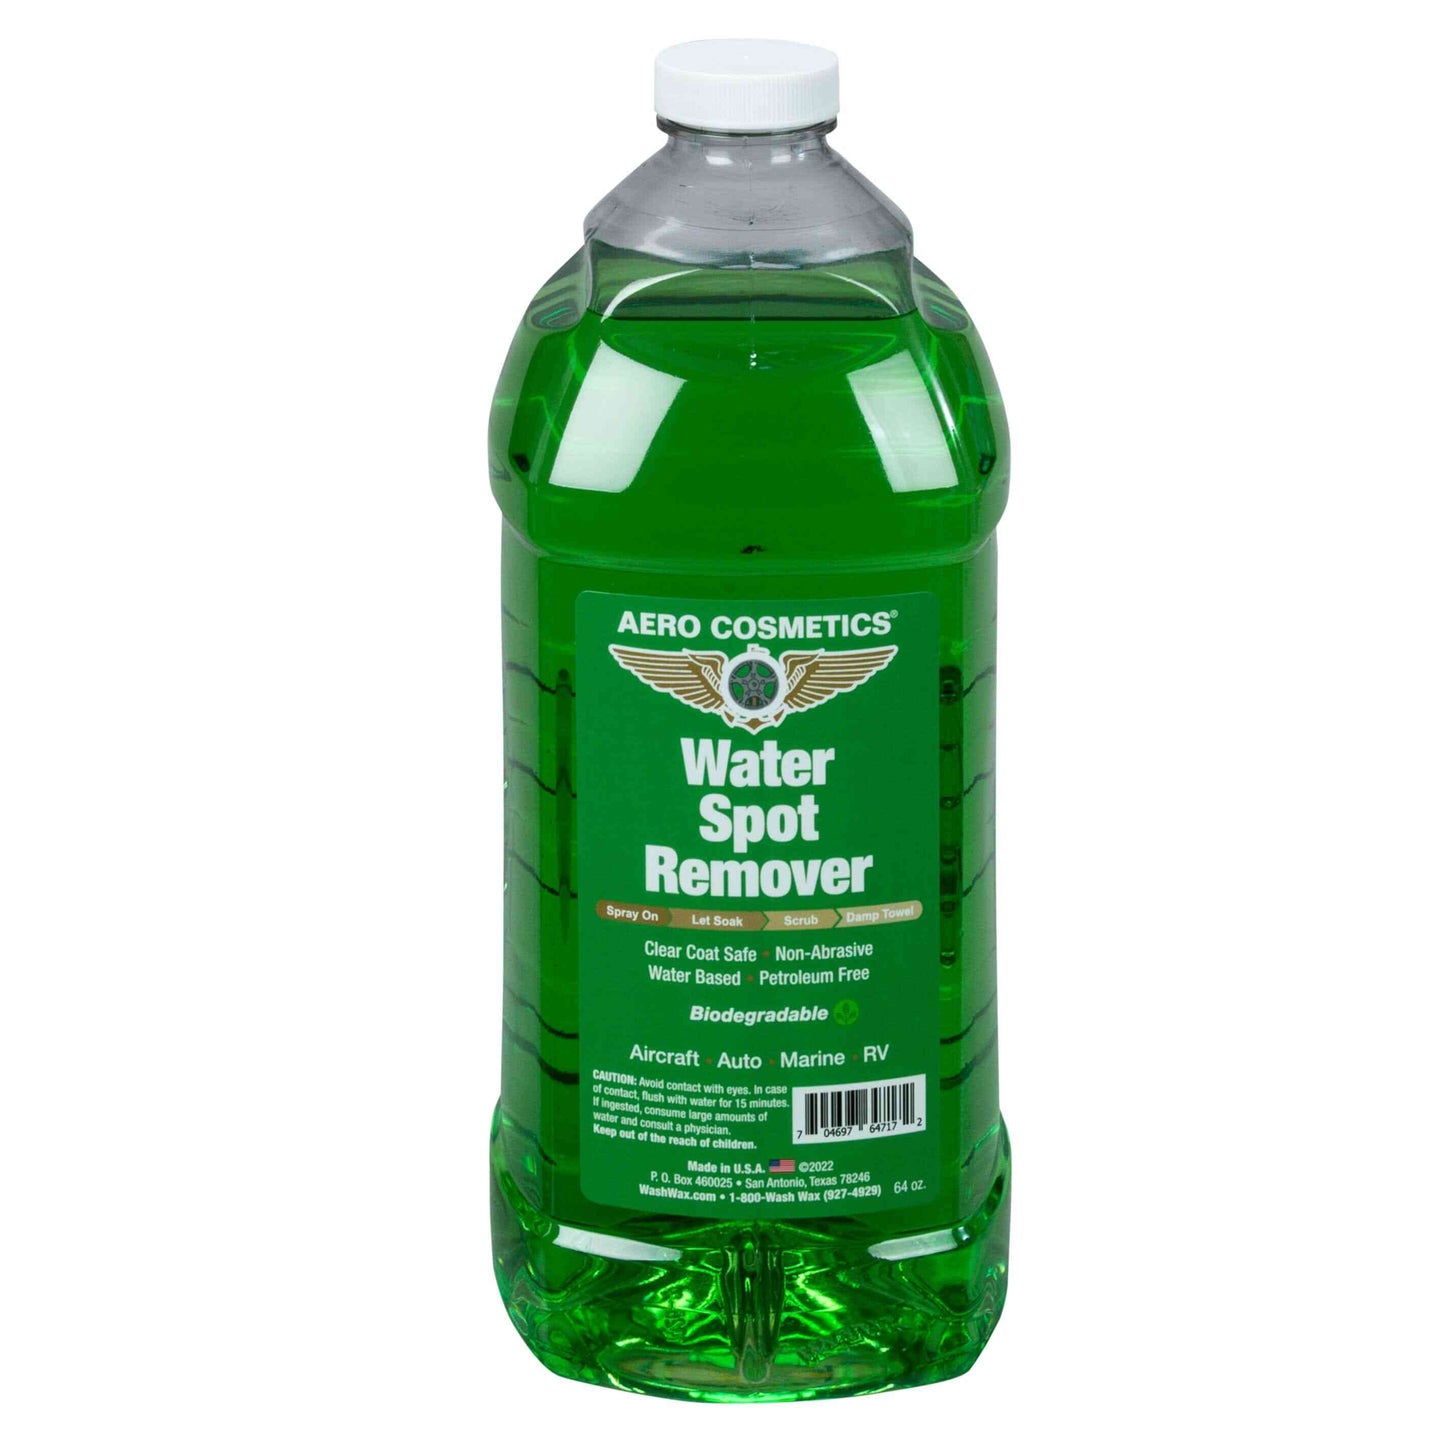 Water Spot Remover 1/2 Gallon - Removes Water Spots from Gel-Coat, Plastic, Chrome, Aluminum and Stainless